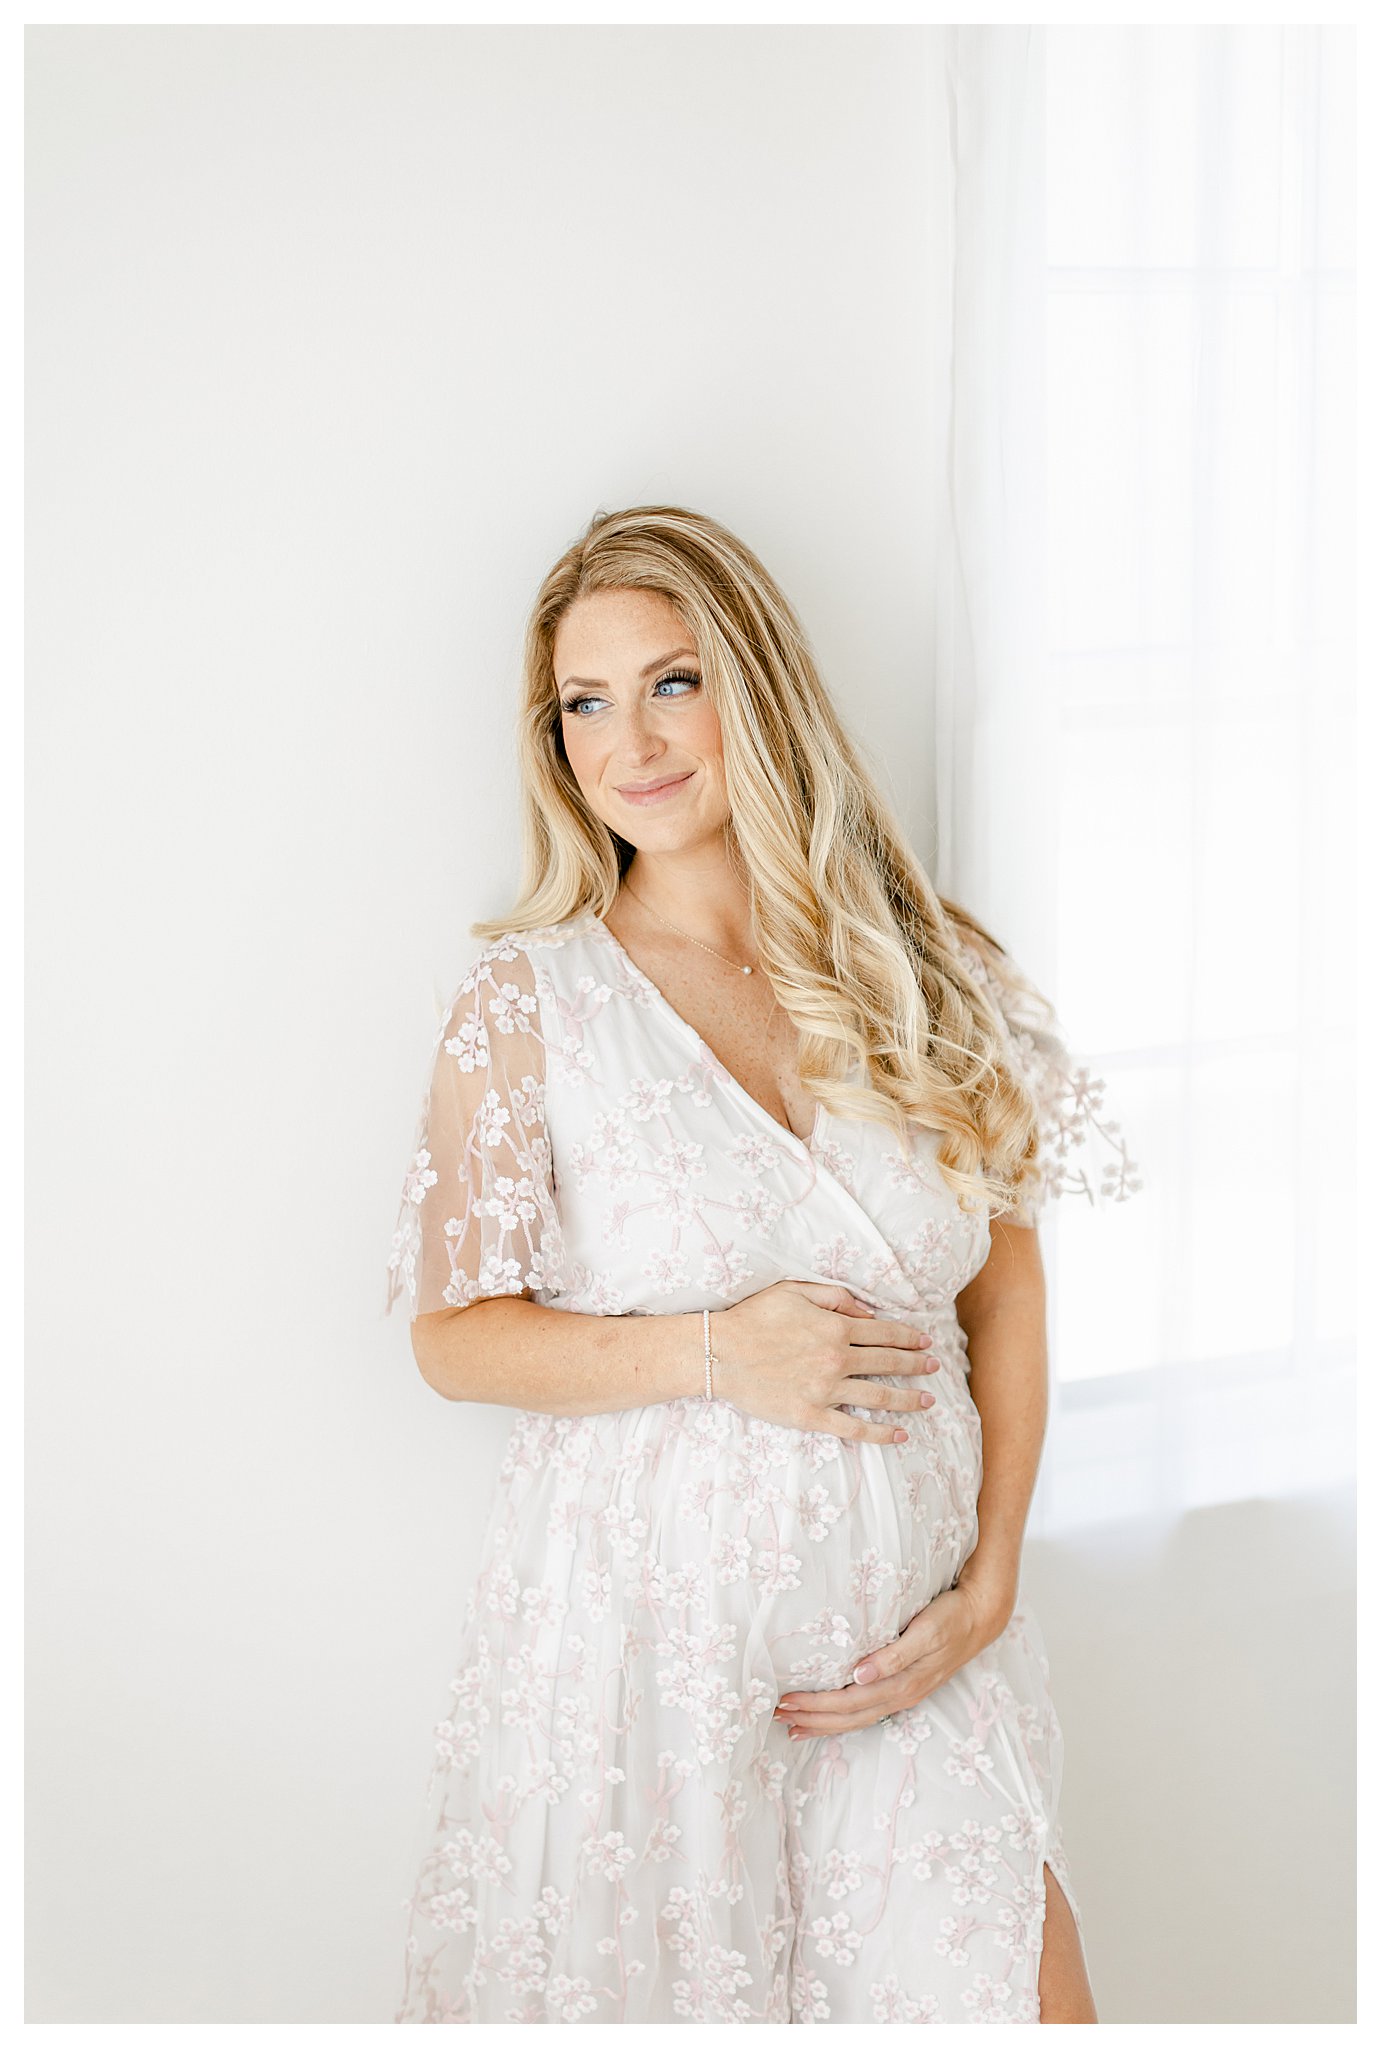 gorgeous expectant mom wearing a pink and white floral dress photographed by Tara Federico